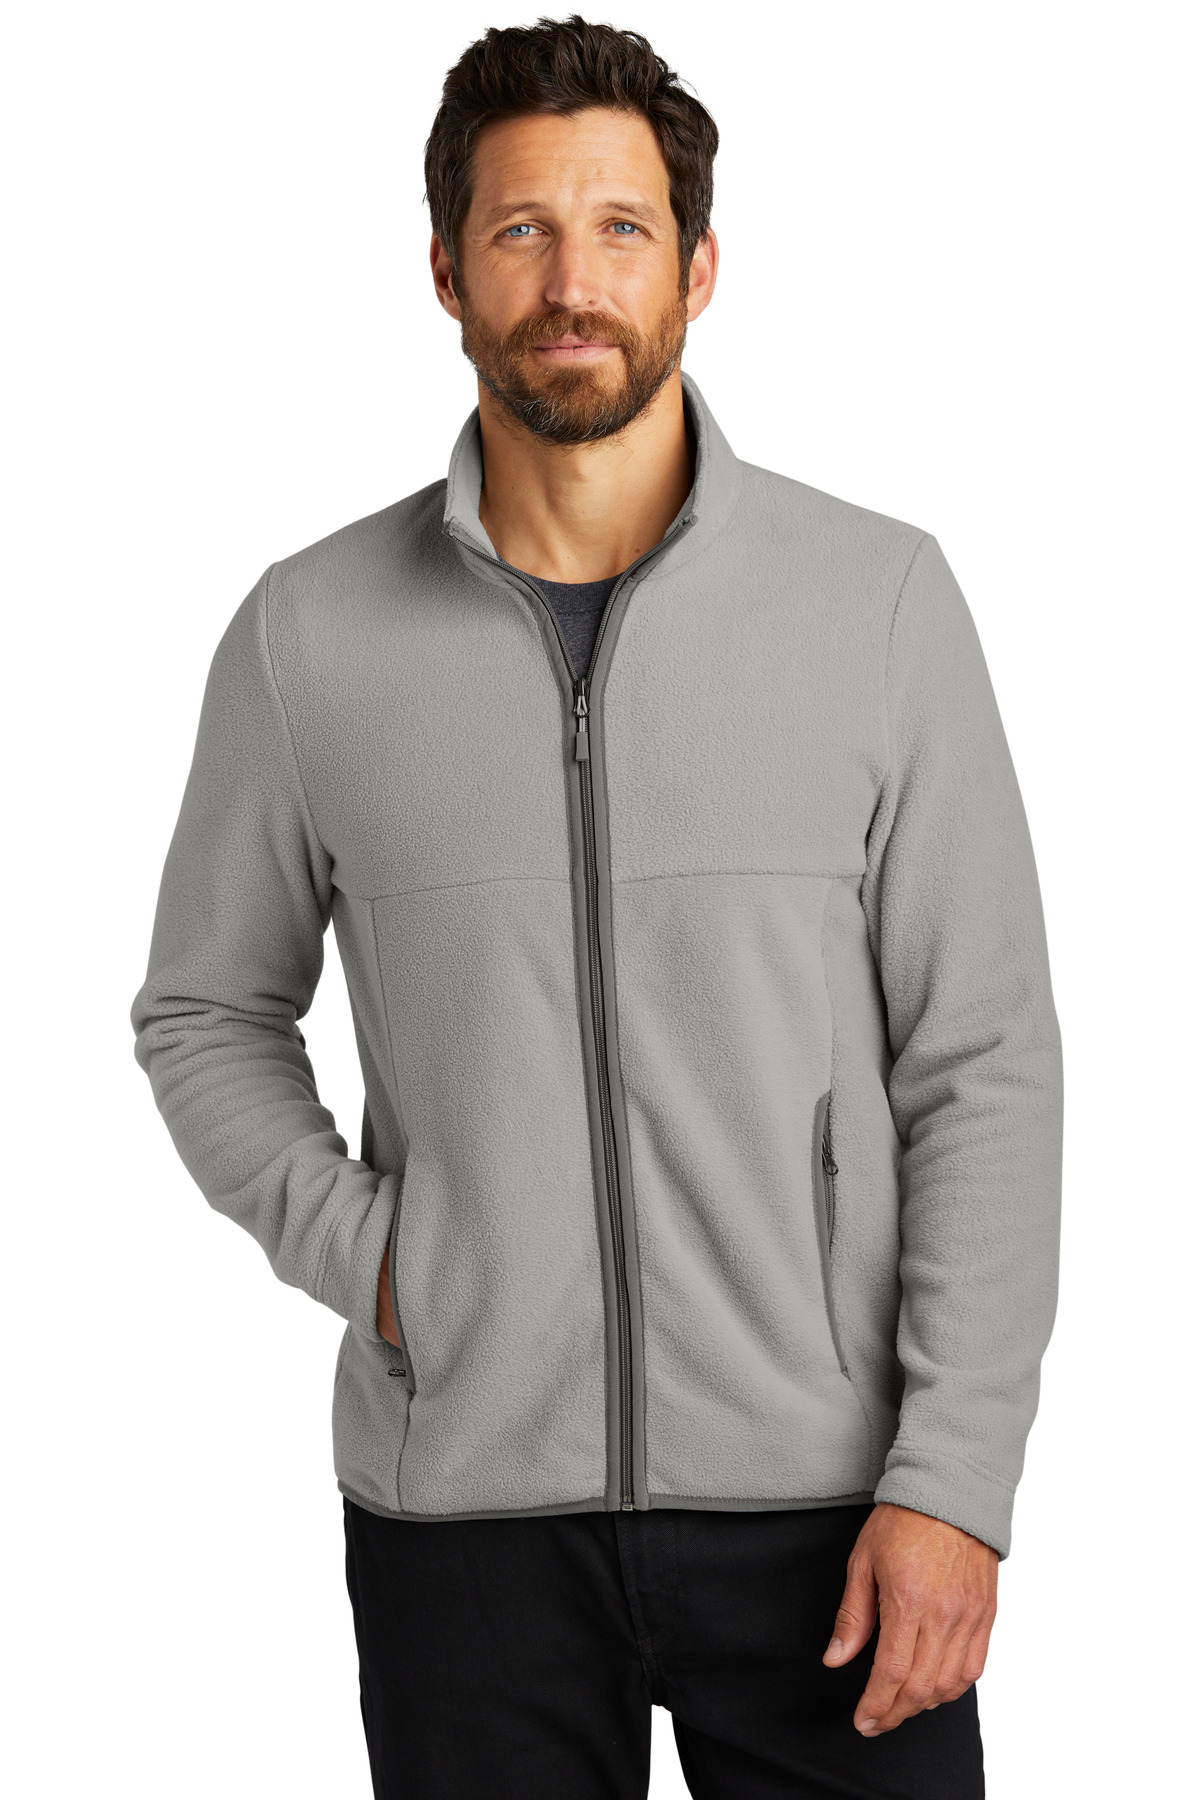 Port Authority F110 Mens Long Sleeve Midweight Connection Fleece Full Zip Jacket With Pockets